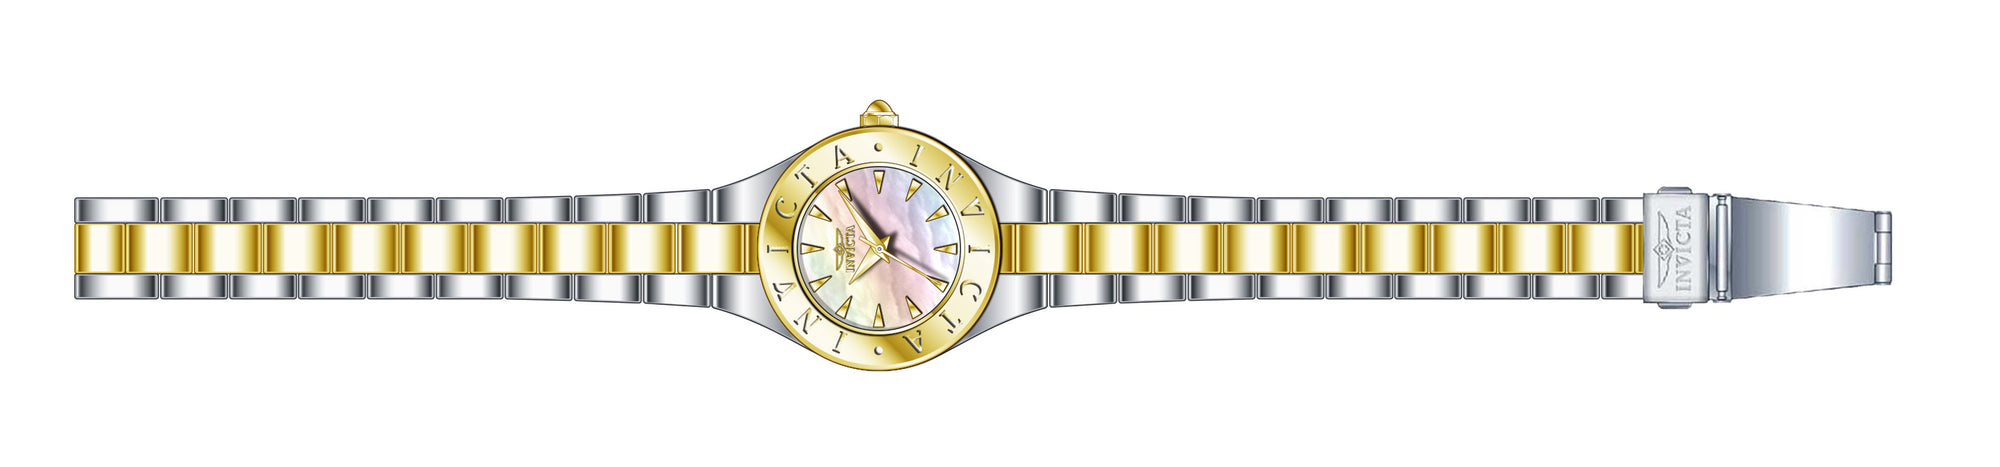 Parts for Invicta Wildflower Lady 39845